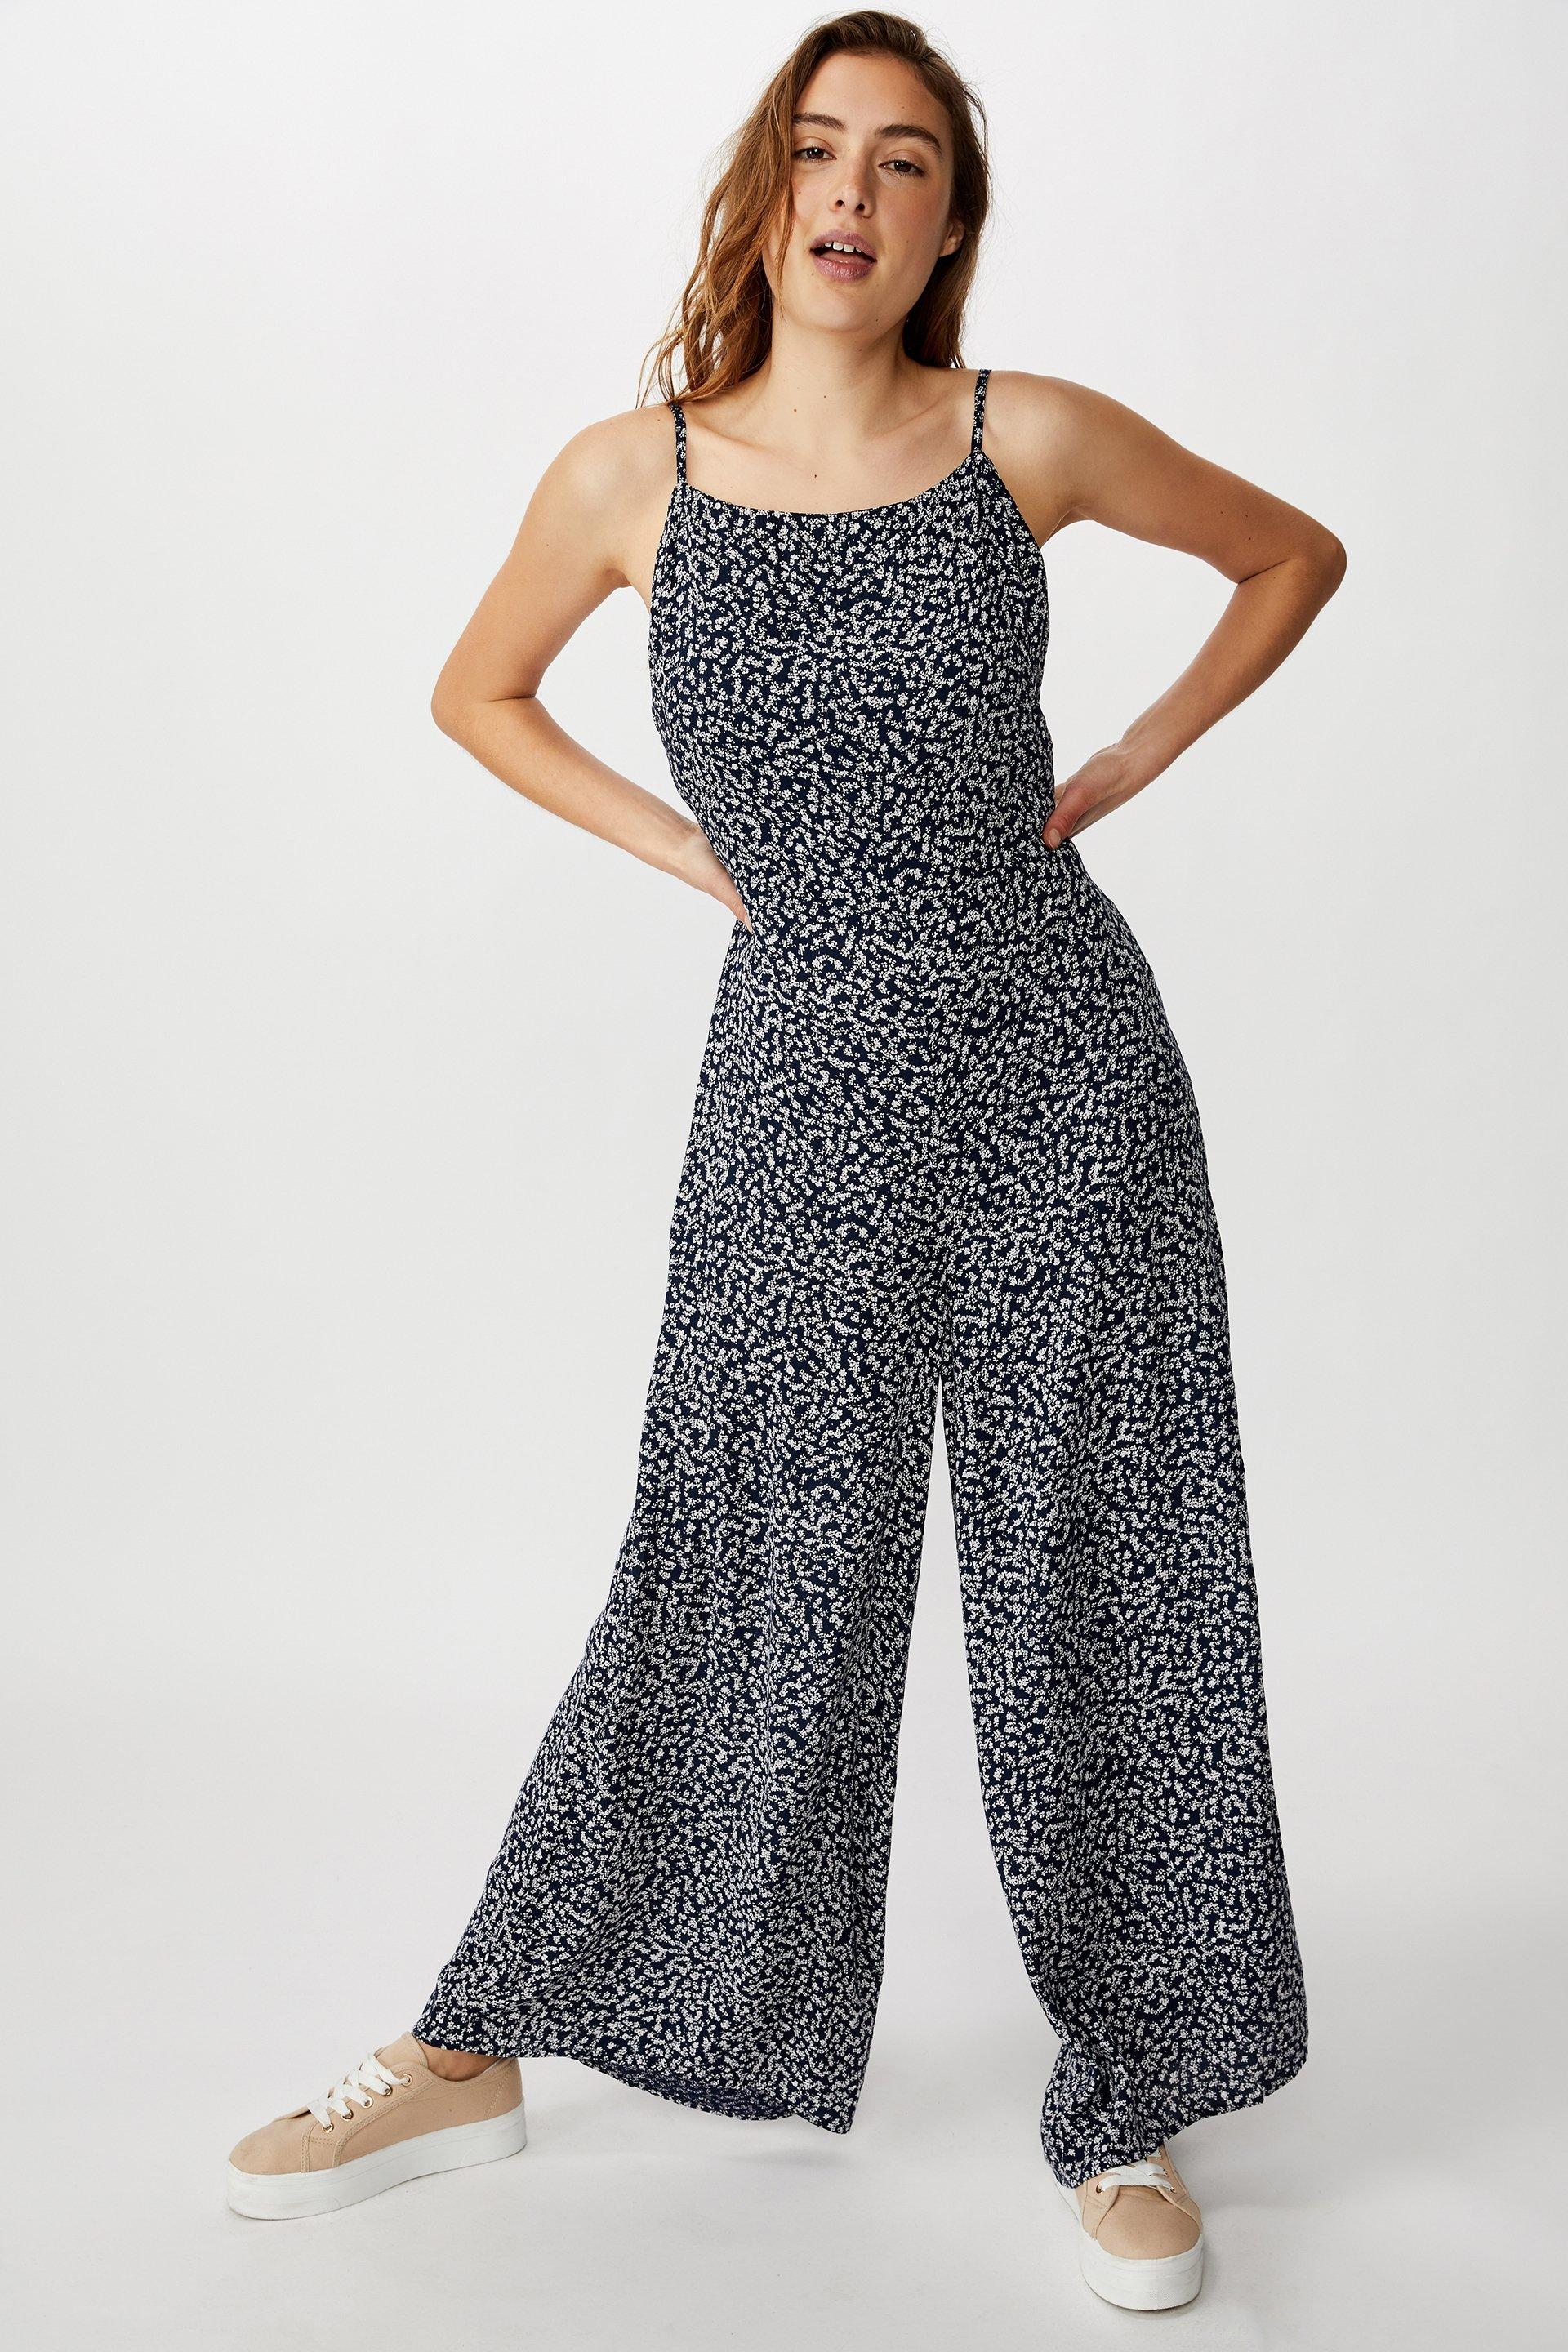 Woven rosie tie back jumpsuit - navy Cotton On Jumpsuits & Playsuits ...